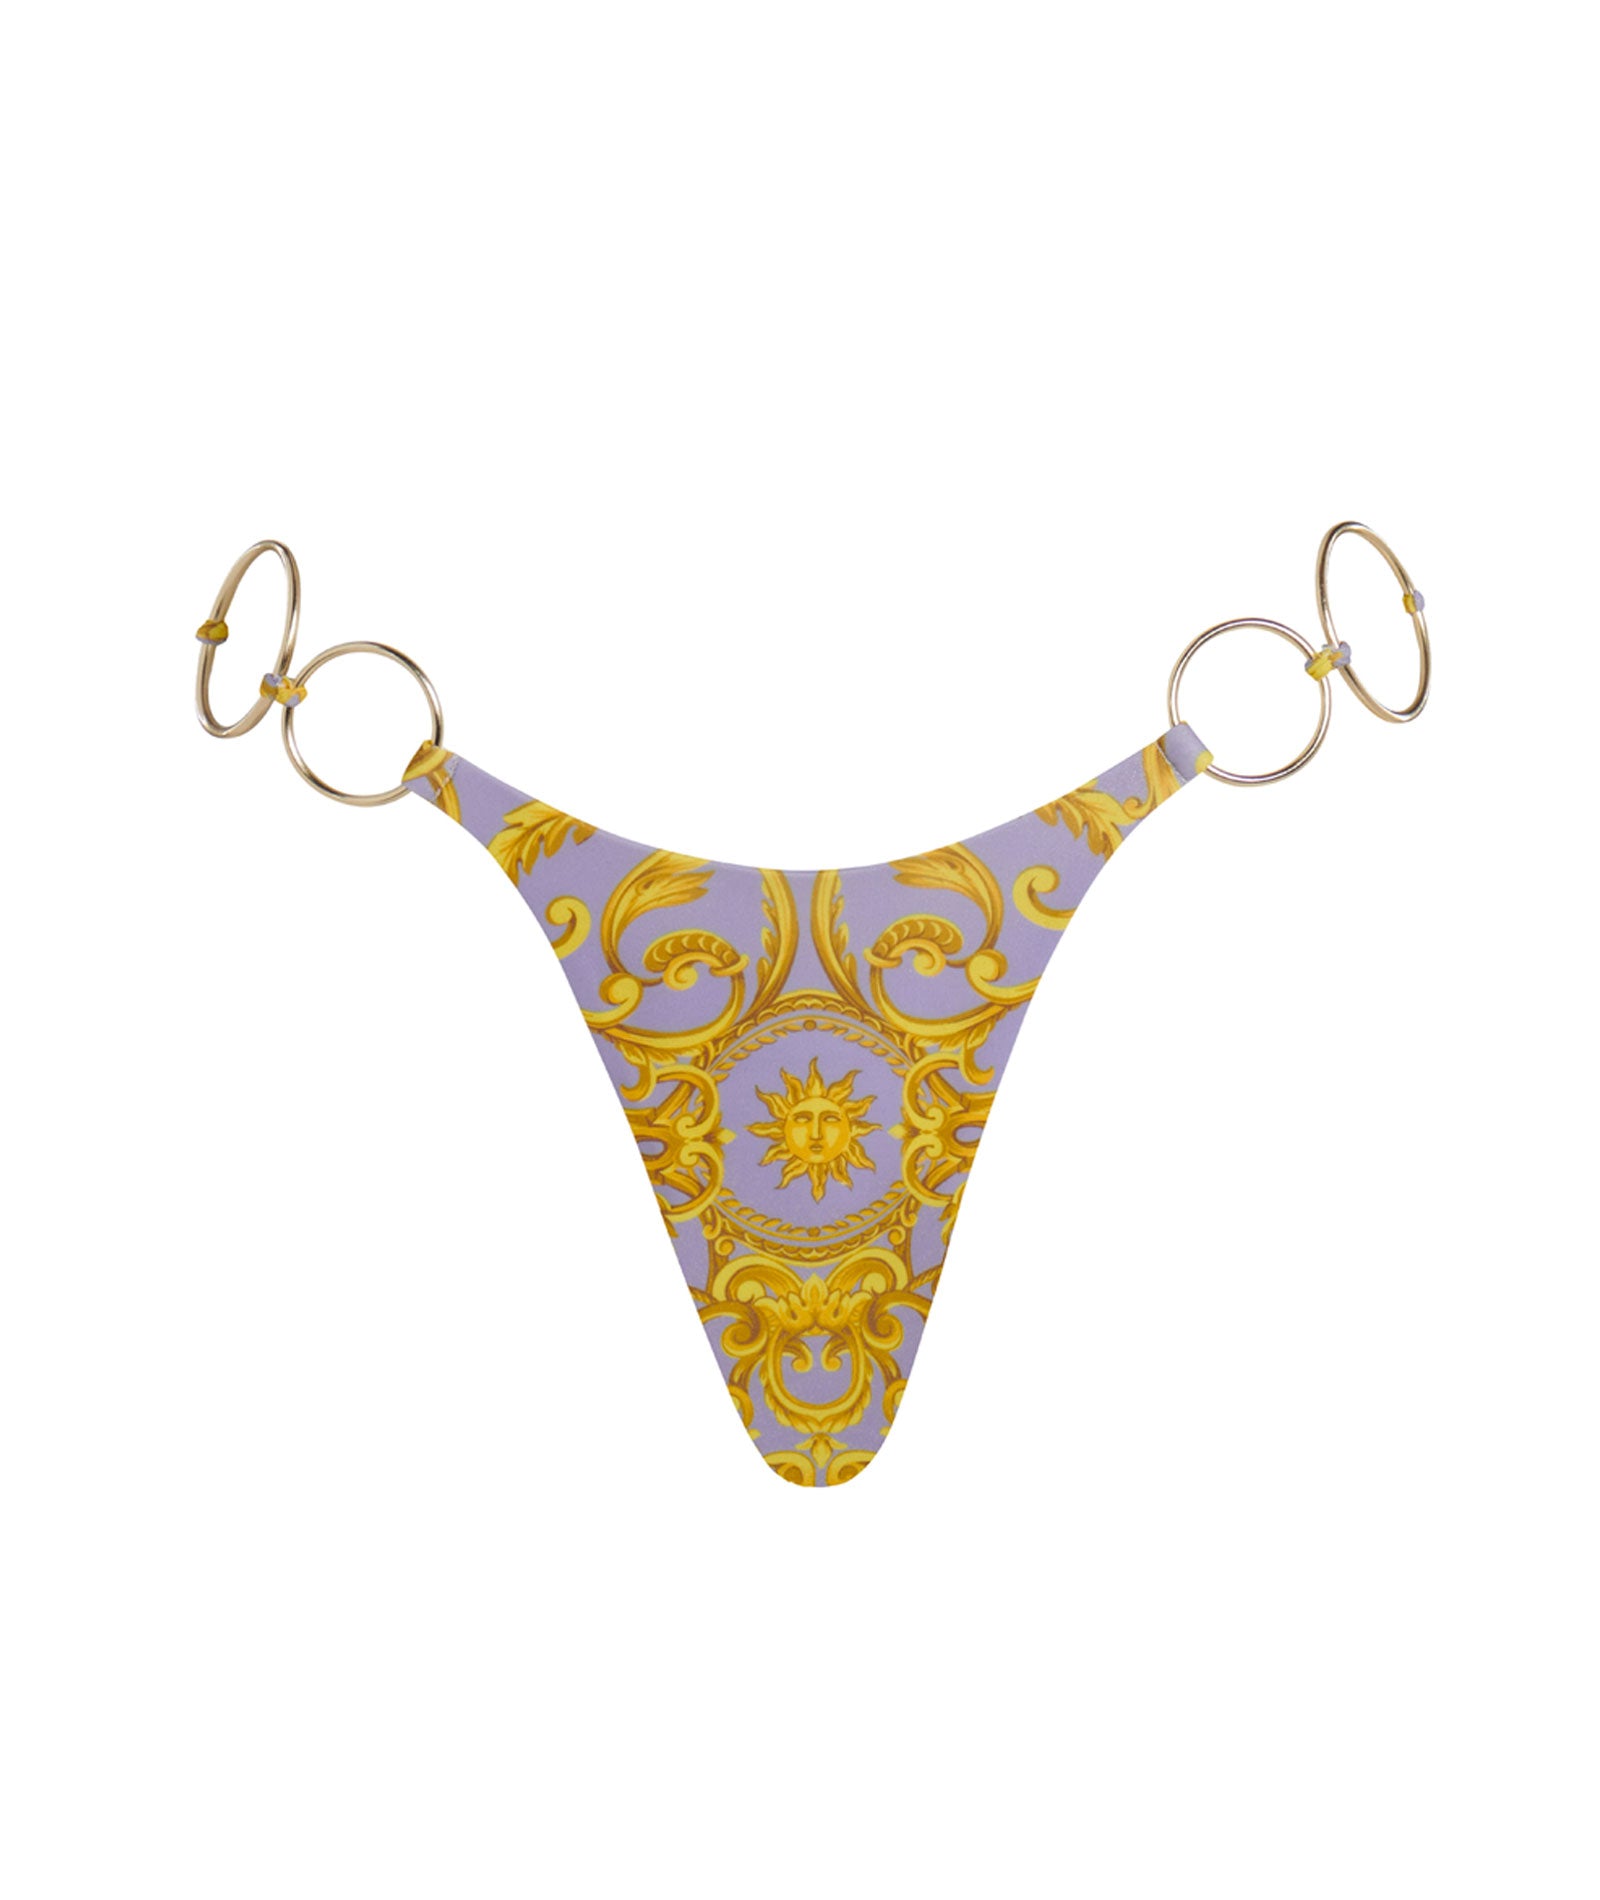 light purple bikini bottoms with gold print sun design and gold ring side details